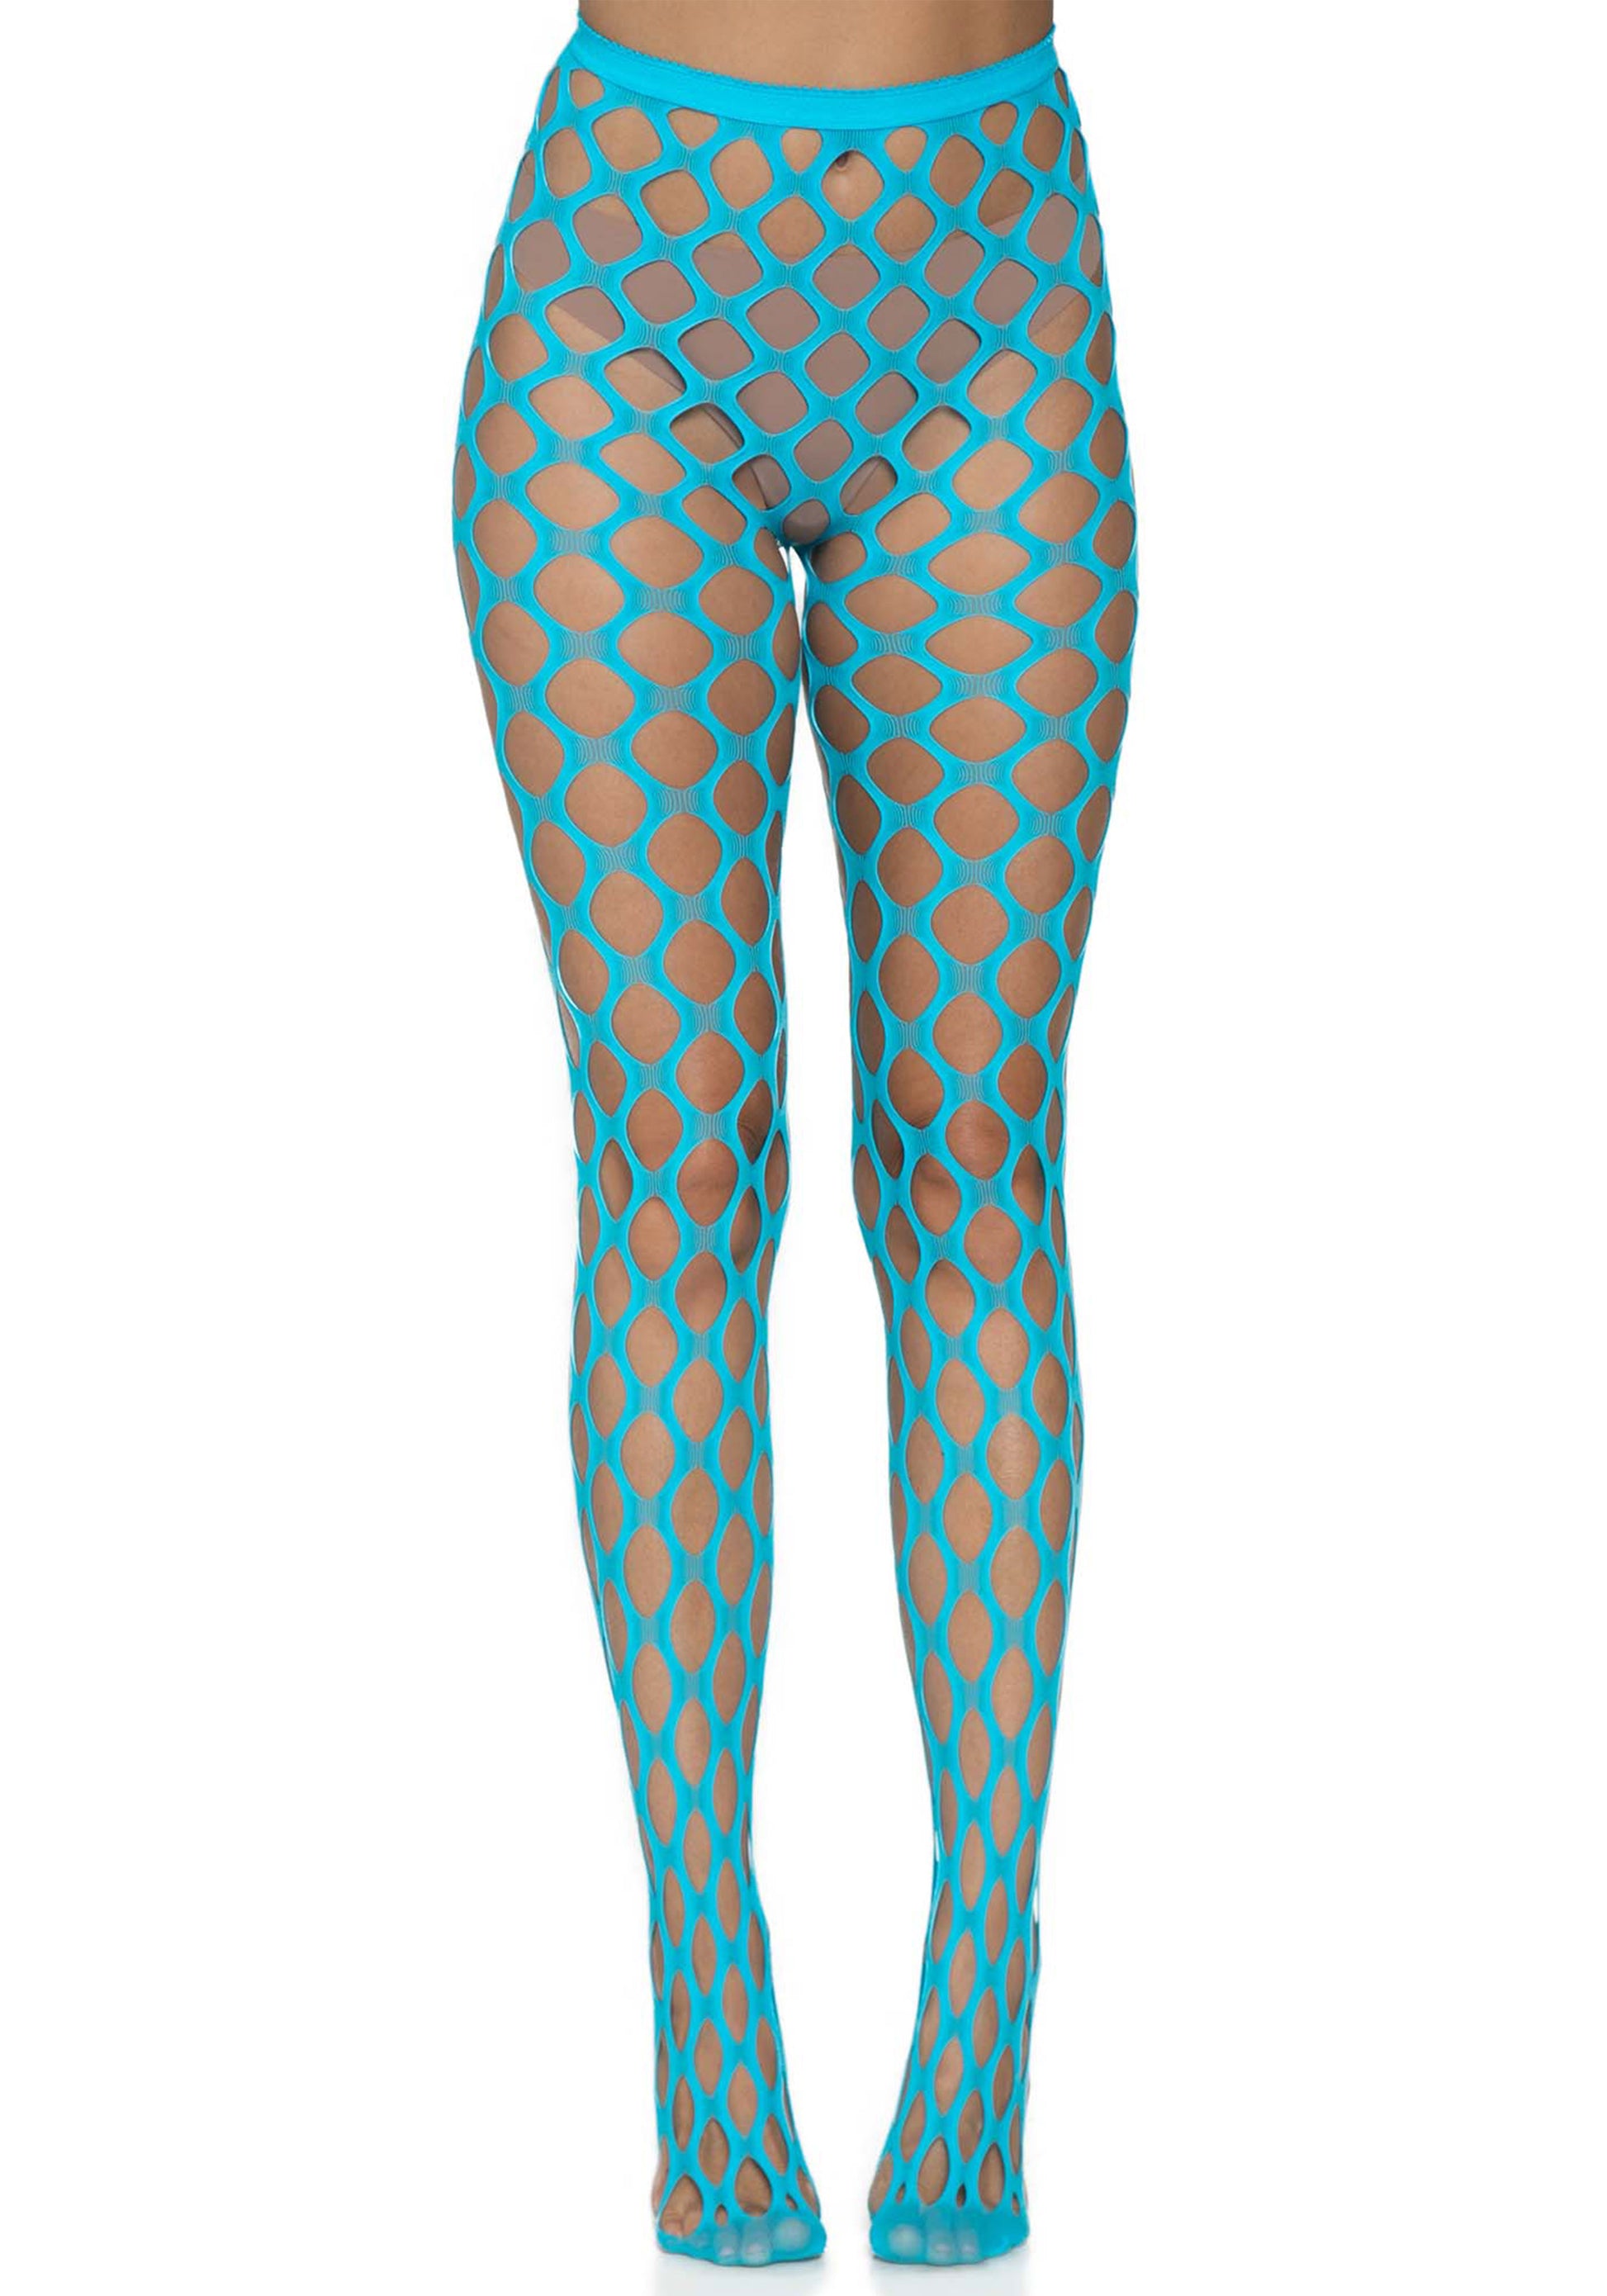 Leg Avenue 9331 Pothole Fishnets - Bright neon blue wide thick circular fishnet tights with micro mesh toe and seamless body. Perfect for festivals, clubs and raves.